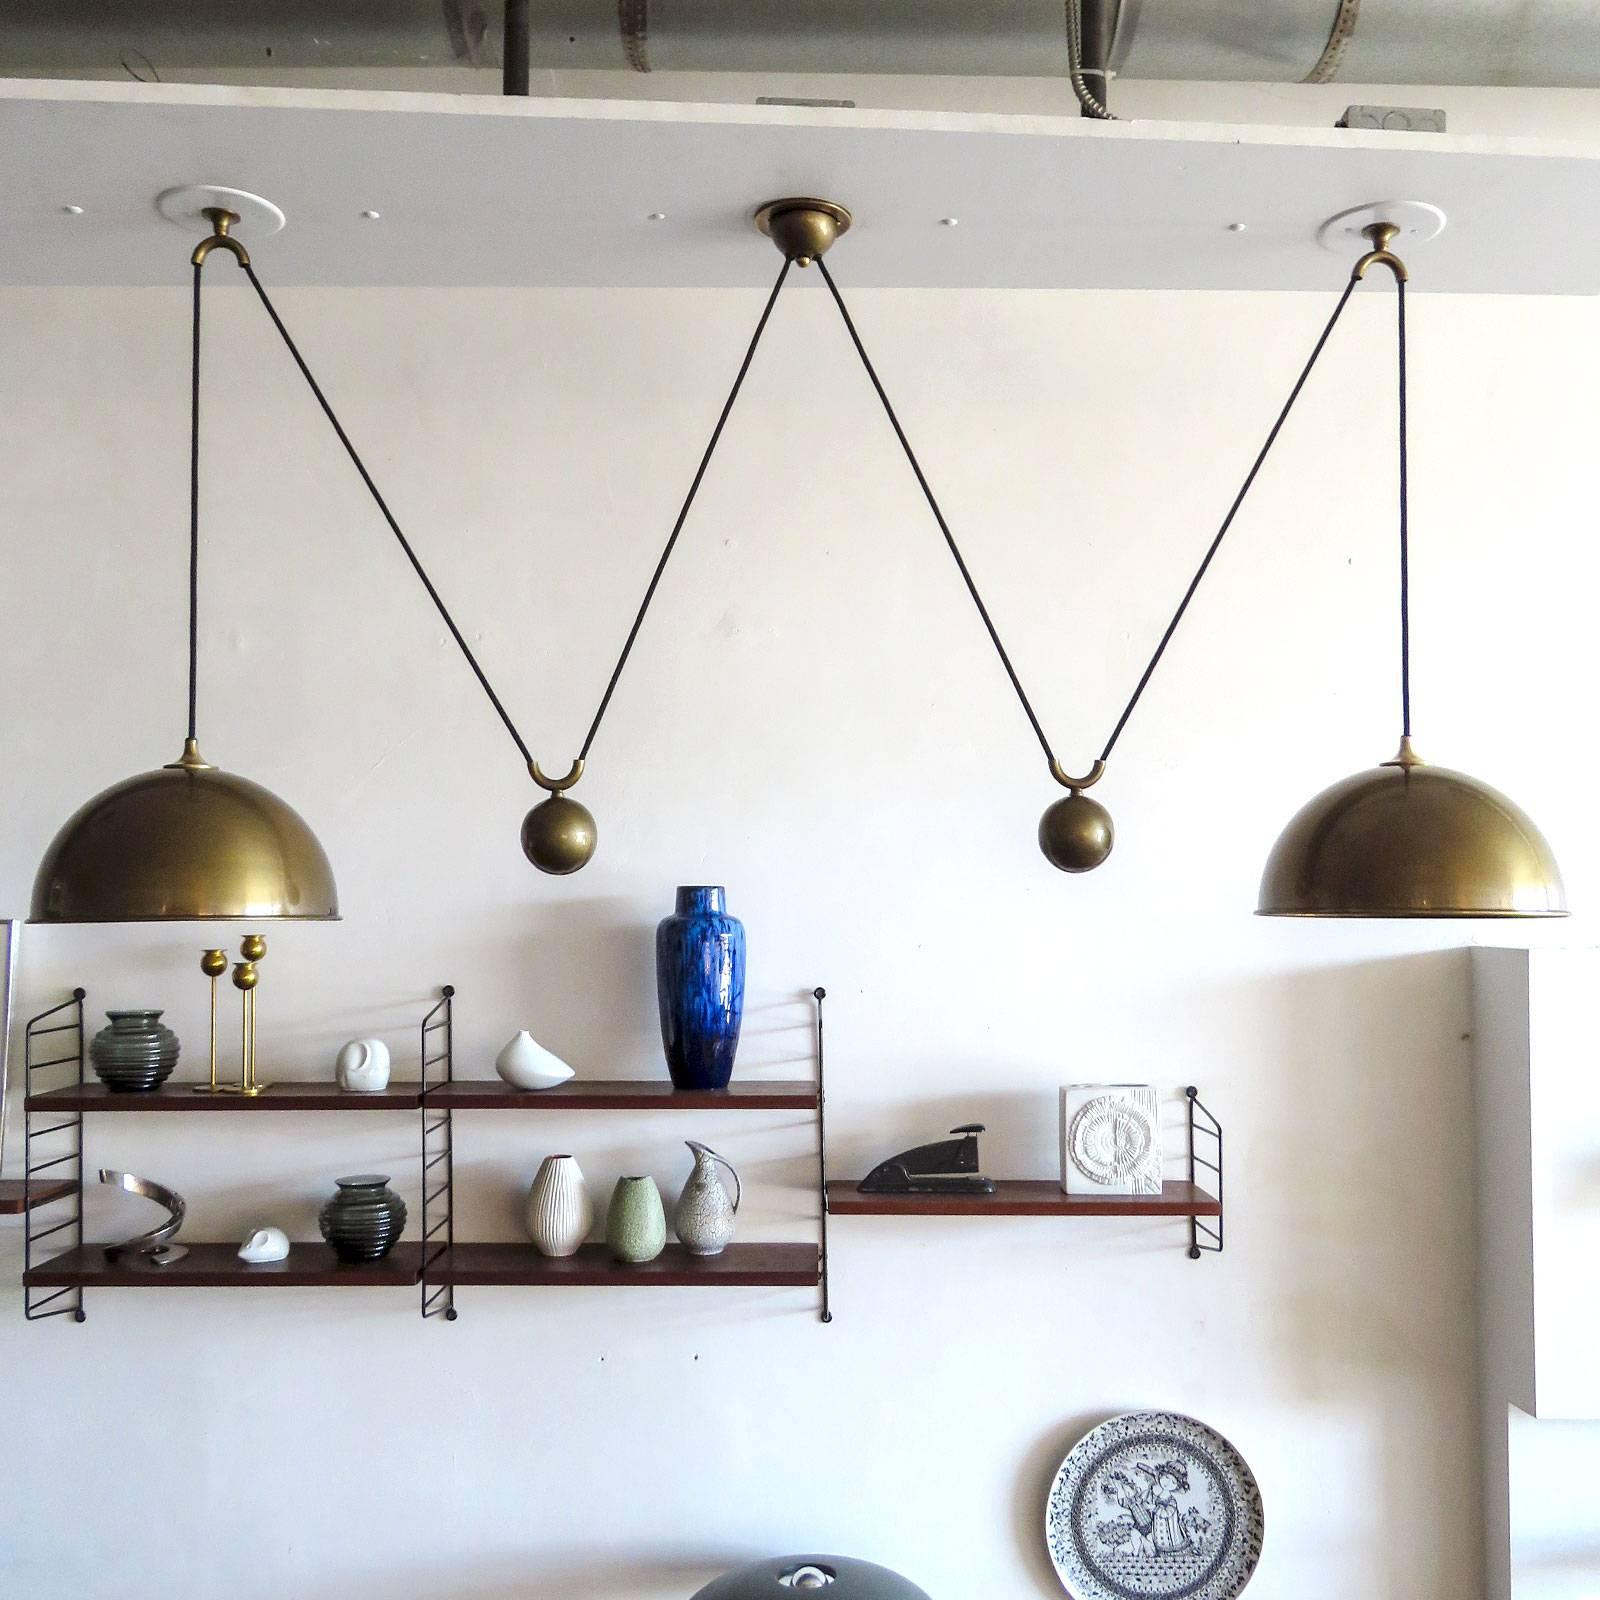 Stunning double brass counter balance pendant by Florian Schulz in great vintage condition, with two brass pendants suspended, each with their own very heavy brass ball counter balance pulley system and black cloth cord, supported by a single center